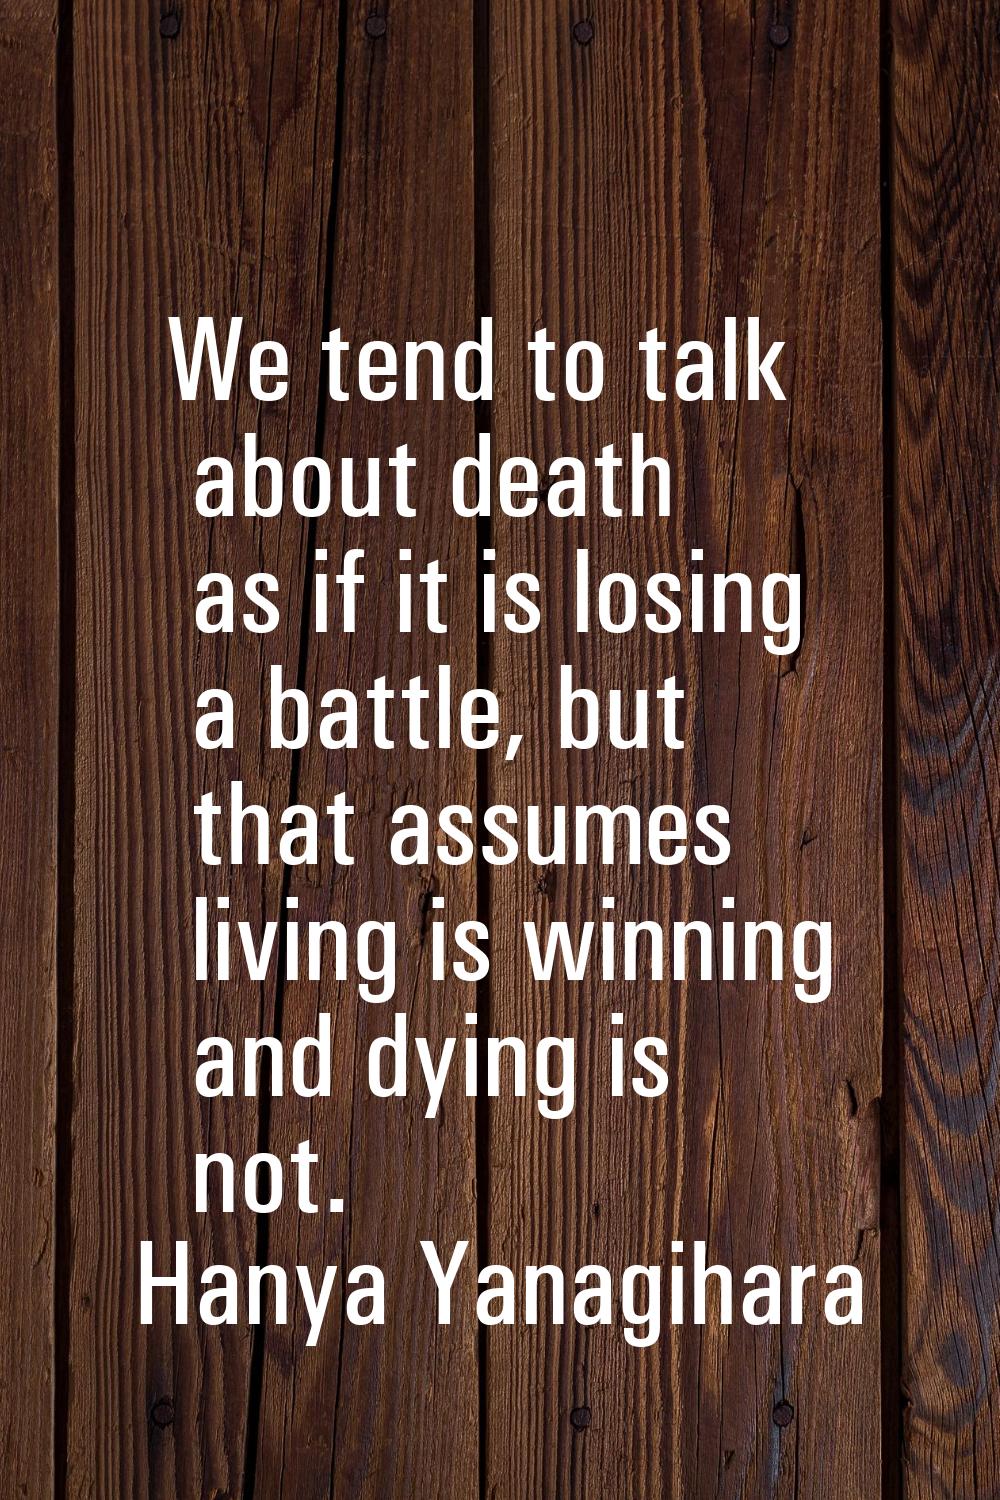 We tend to talk about death as if it is losing a battle, but that assumes living is winning and dyi